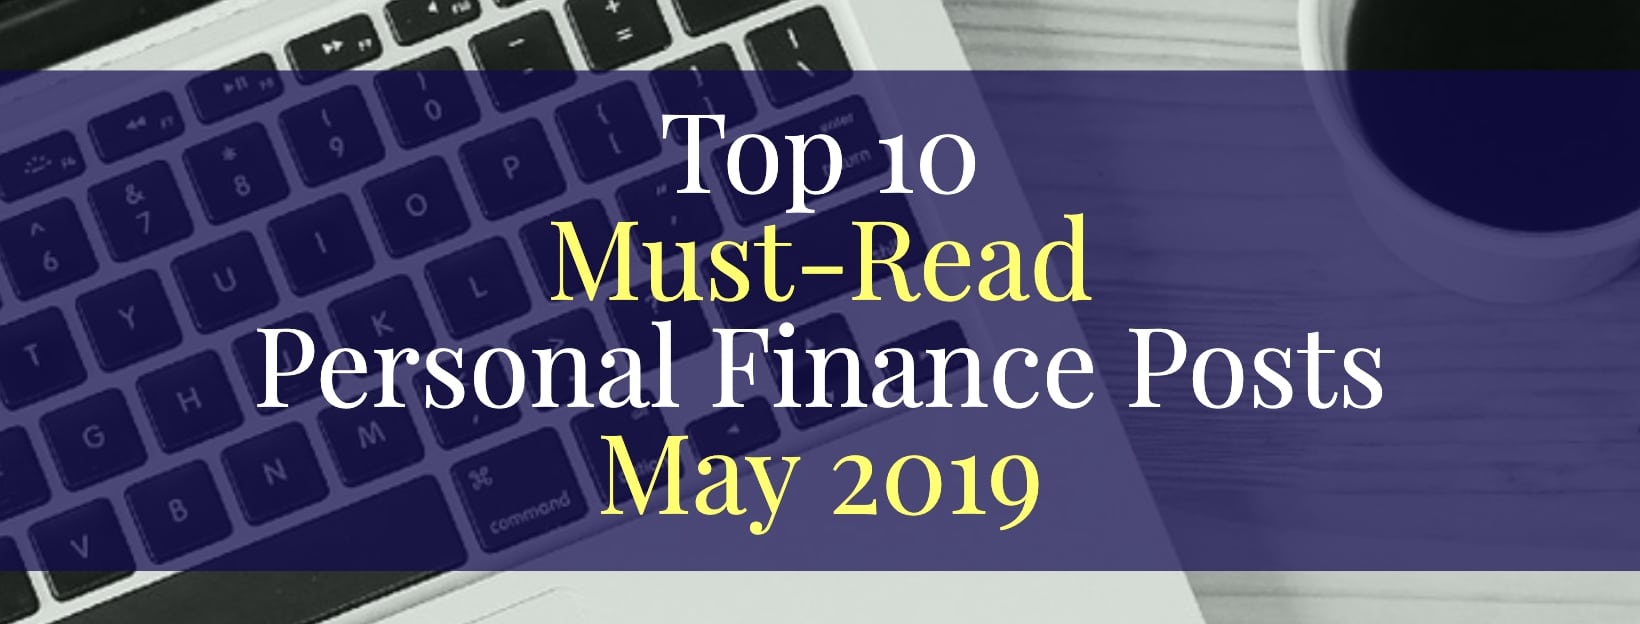 Top 10 Must-Read Personal Finance Posts May 2019